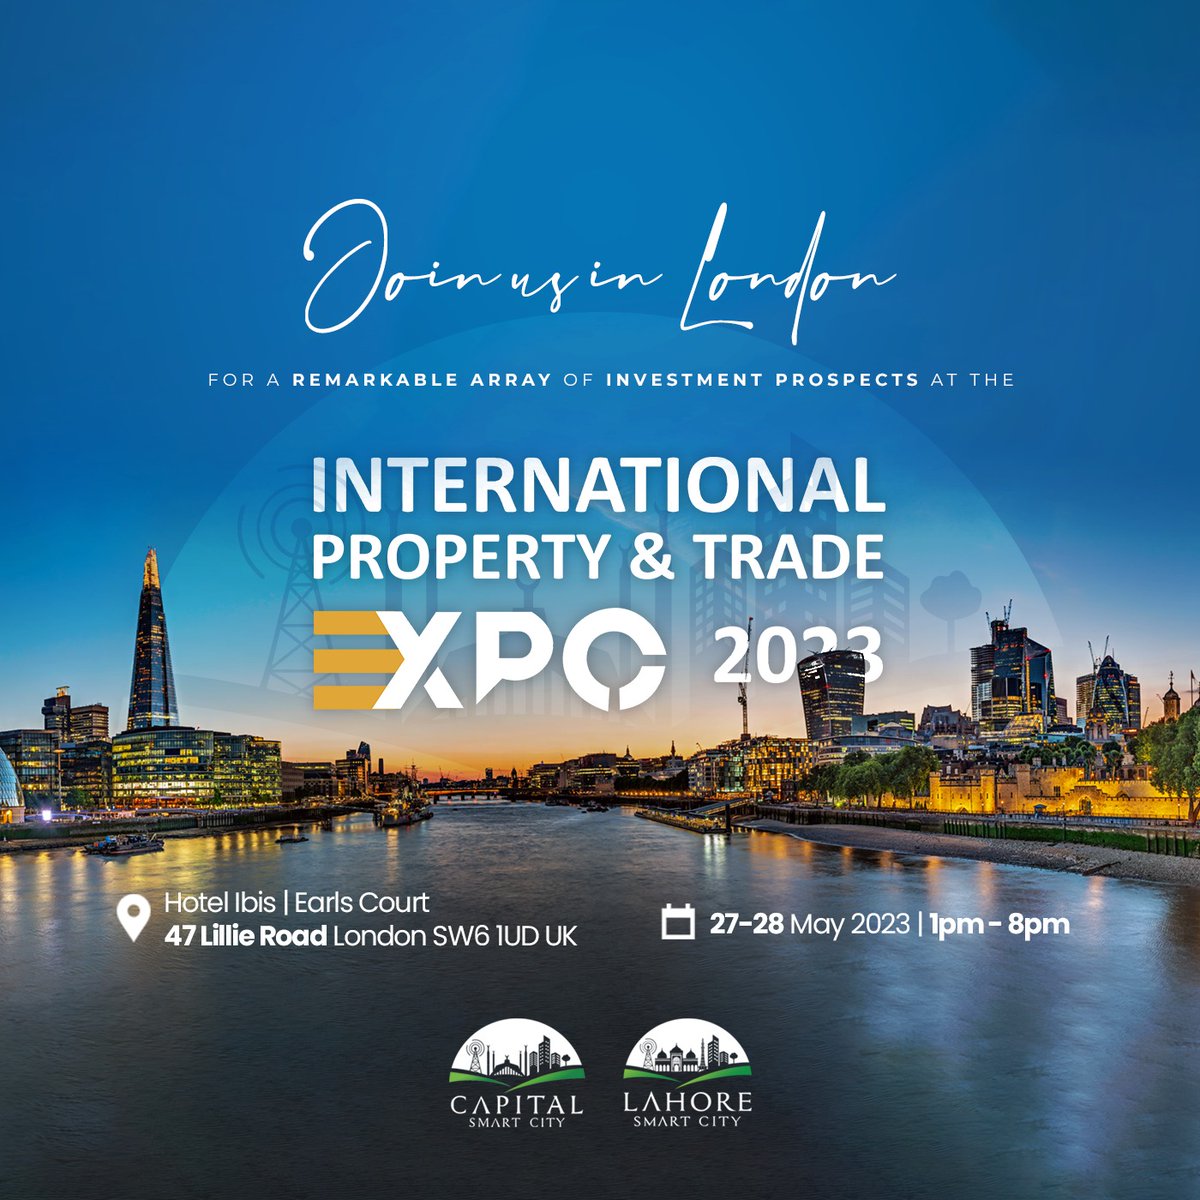 London awaits! 

Experience an extraordinary showcase of investment opportunities at the highly anticipated International Property & Trade Expo 2023.

#SmartCity #CapitalSmartCity #LahoreSmartCity #London #InternationalPropertyandTradeExpo2023 #Expo2023